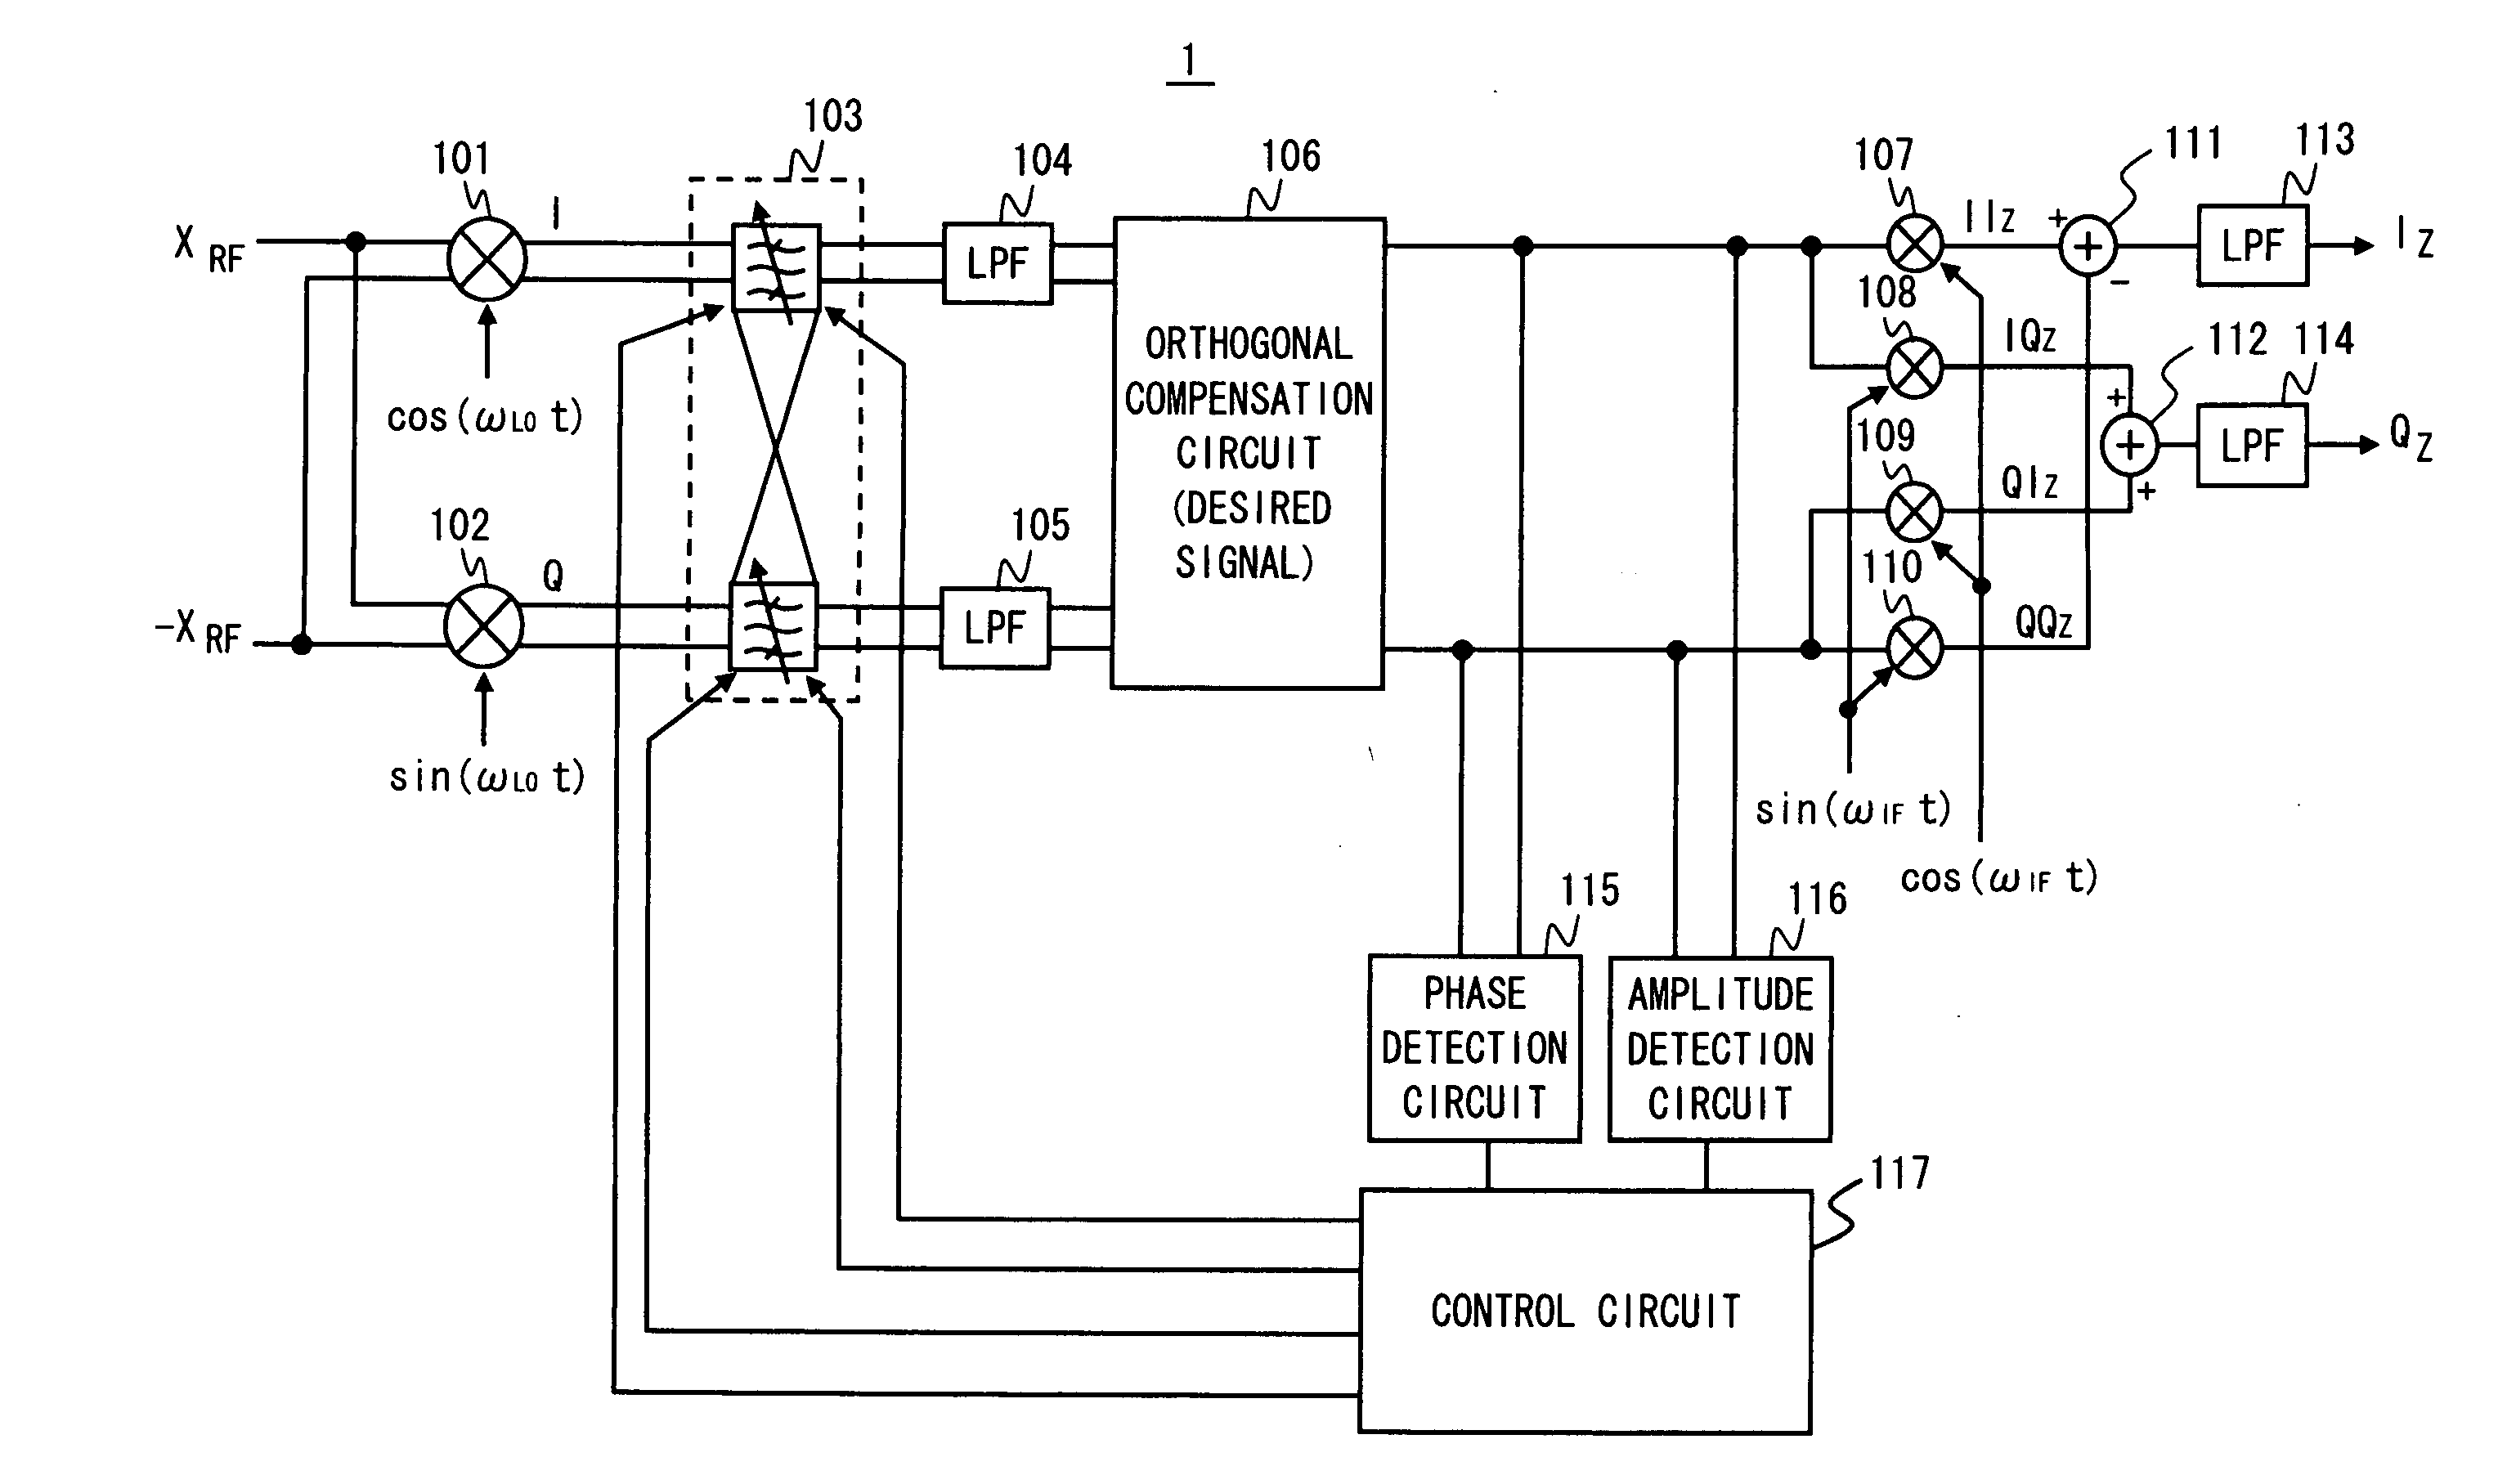 Receiving apparatus and image rejection method